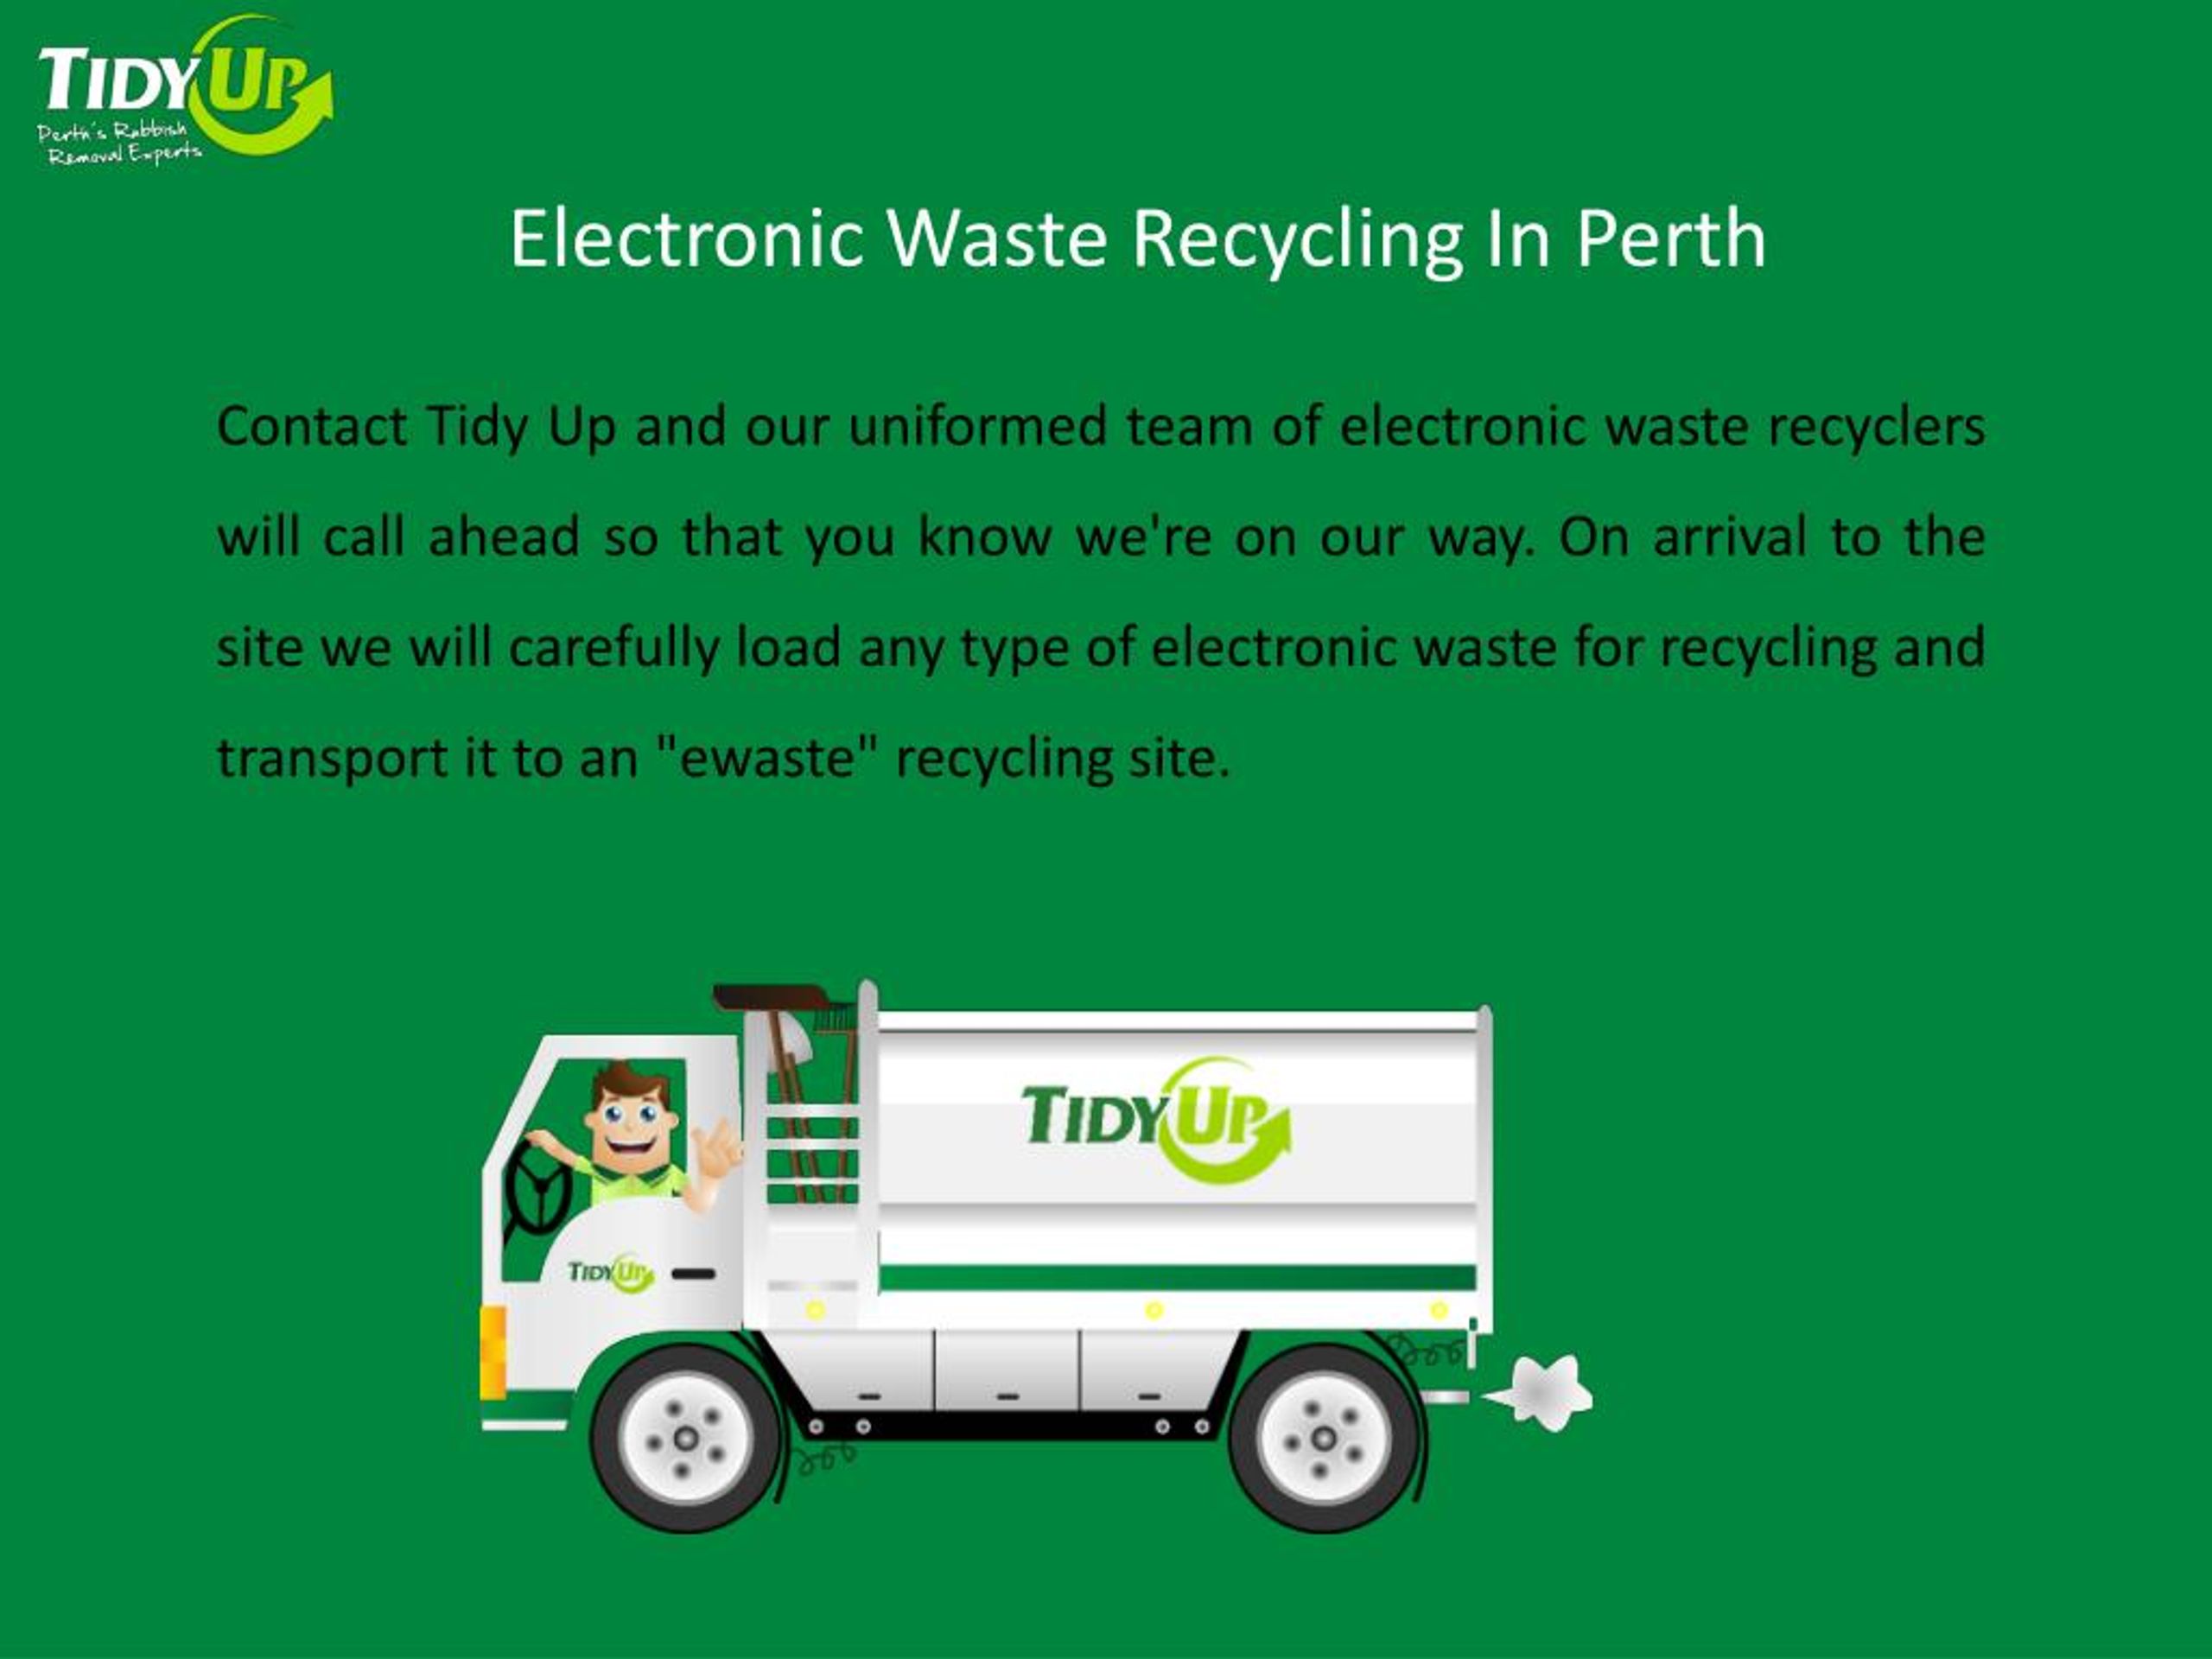 PPT Experienced Electronic Waste Recycle Perth Tidy Up PowerPoint Presentation ID